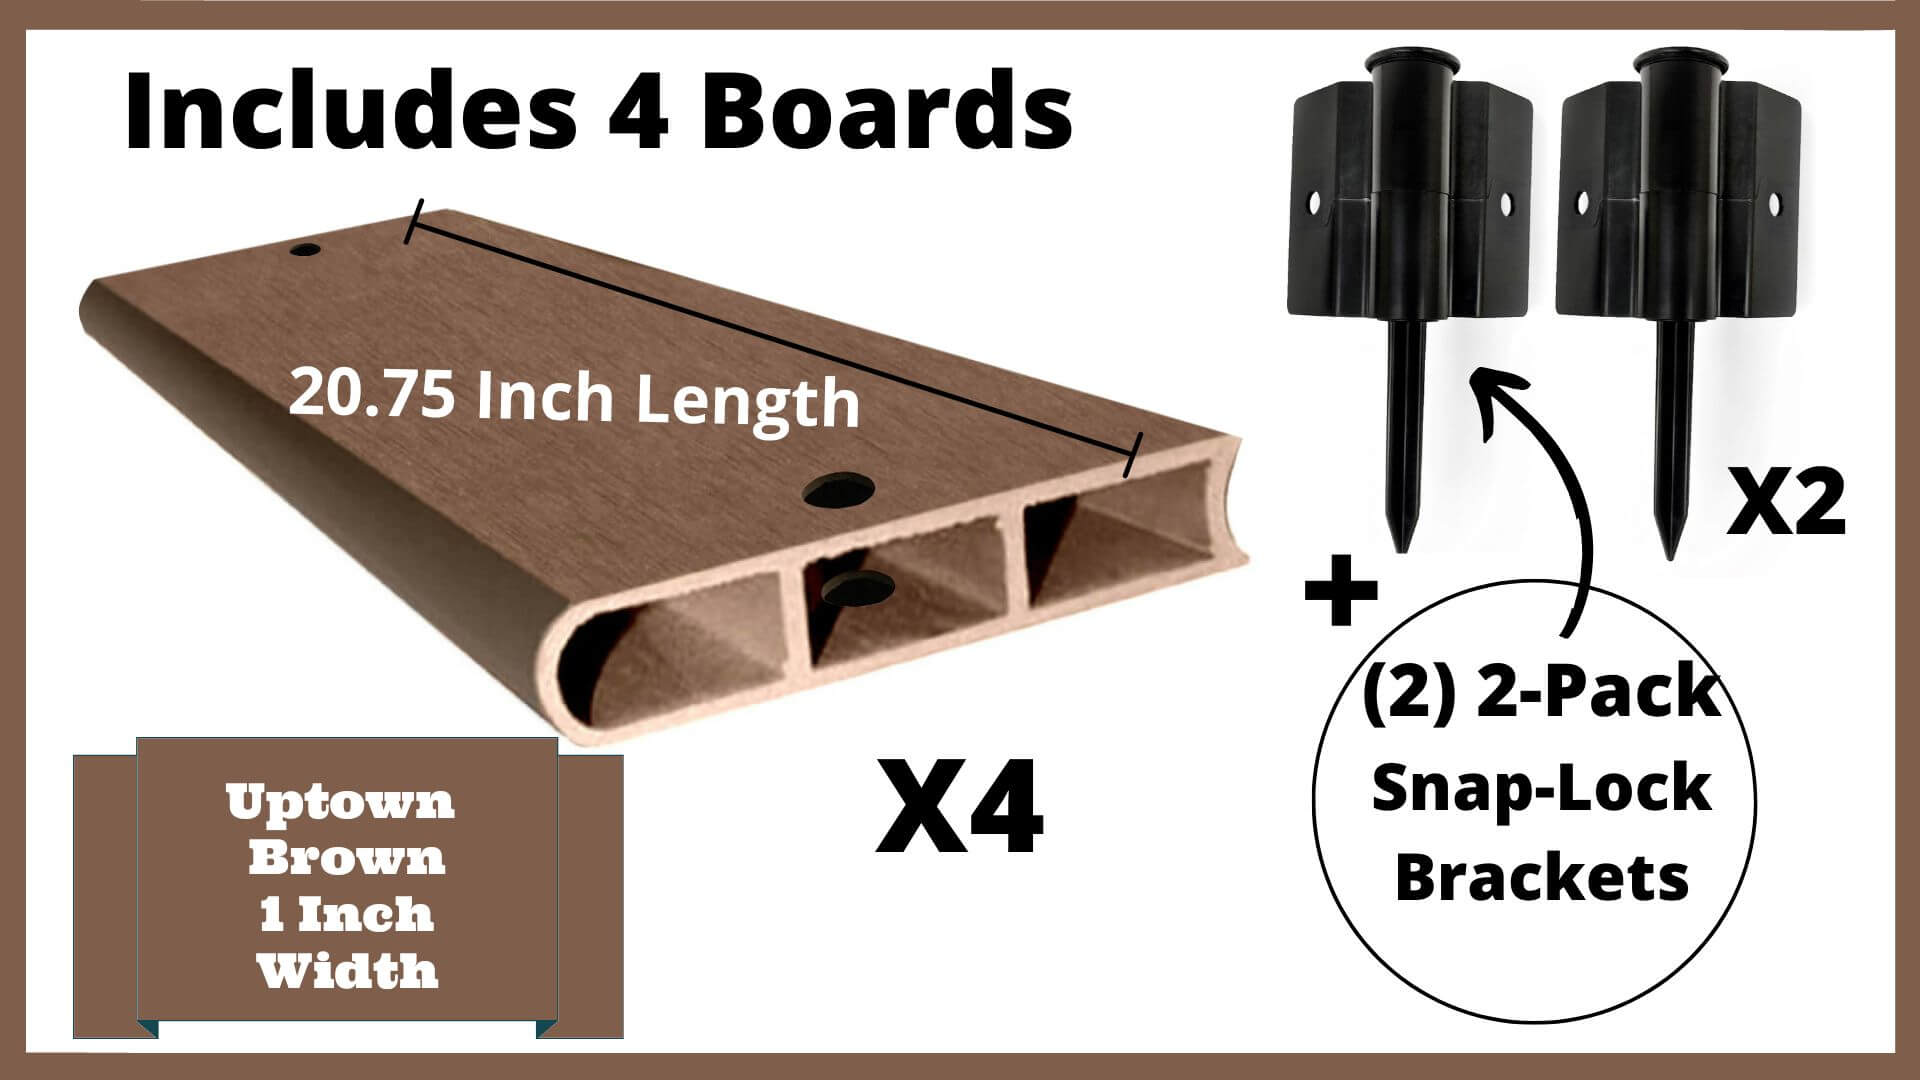 Uptown Brown 1" Profile Components Parts Frame It All 2ft Straight Snap-Lock Boards (4PK + Brackets) 